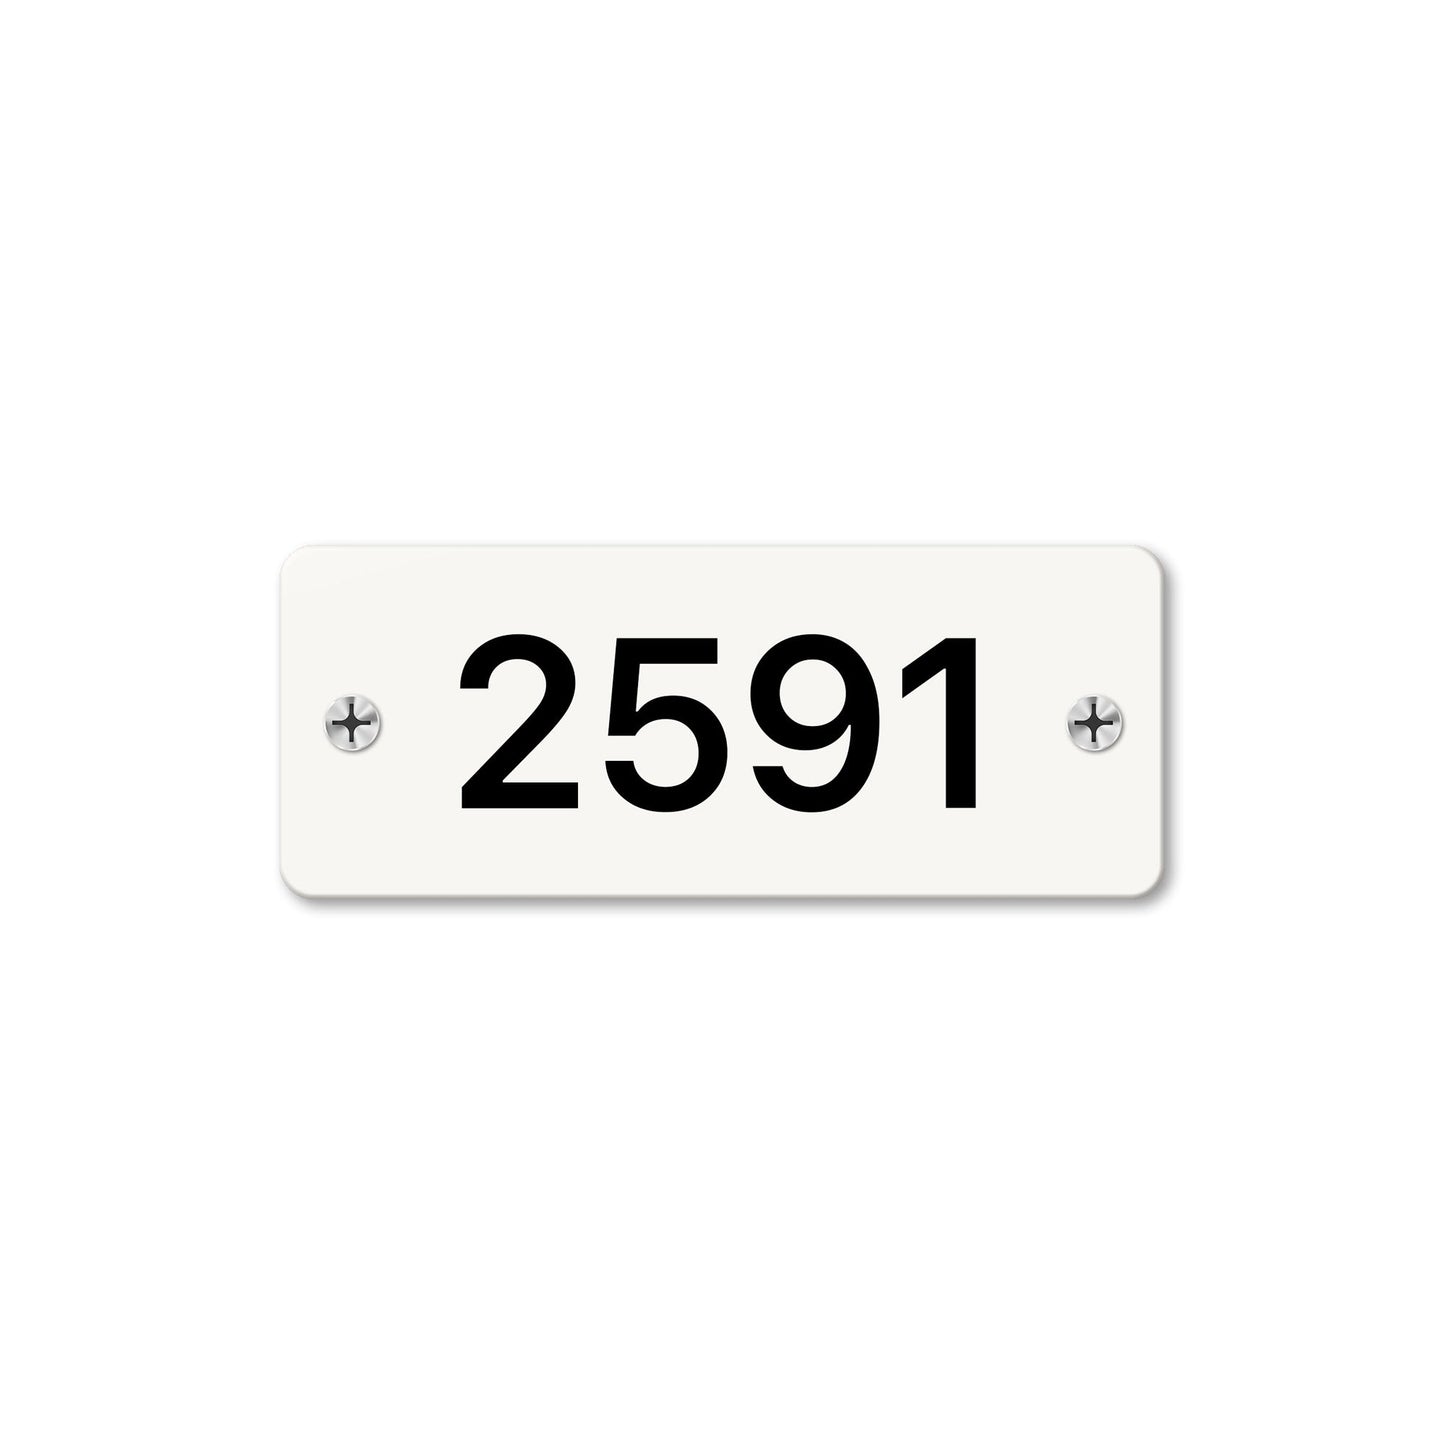 Numeral 2591